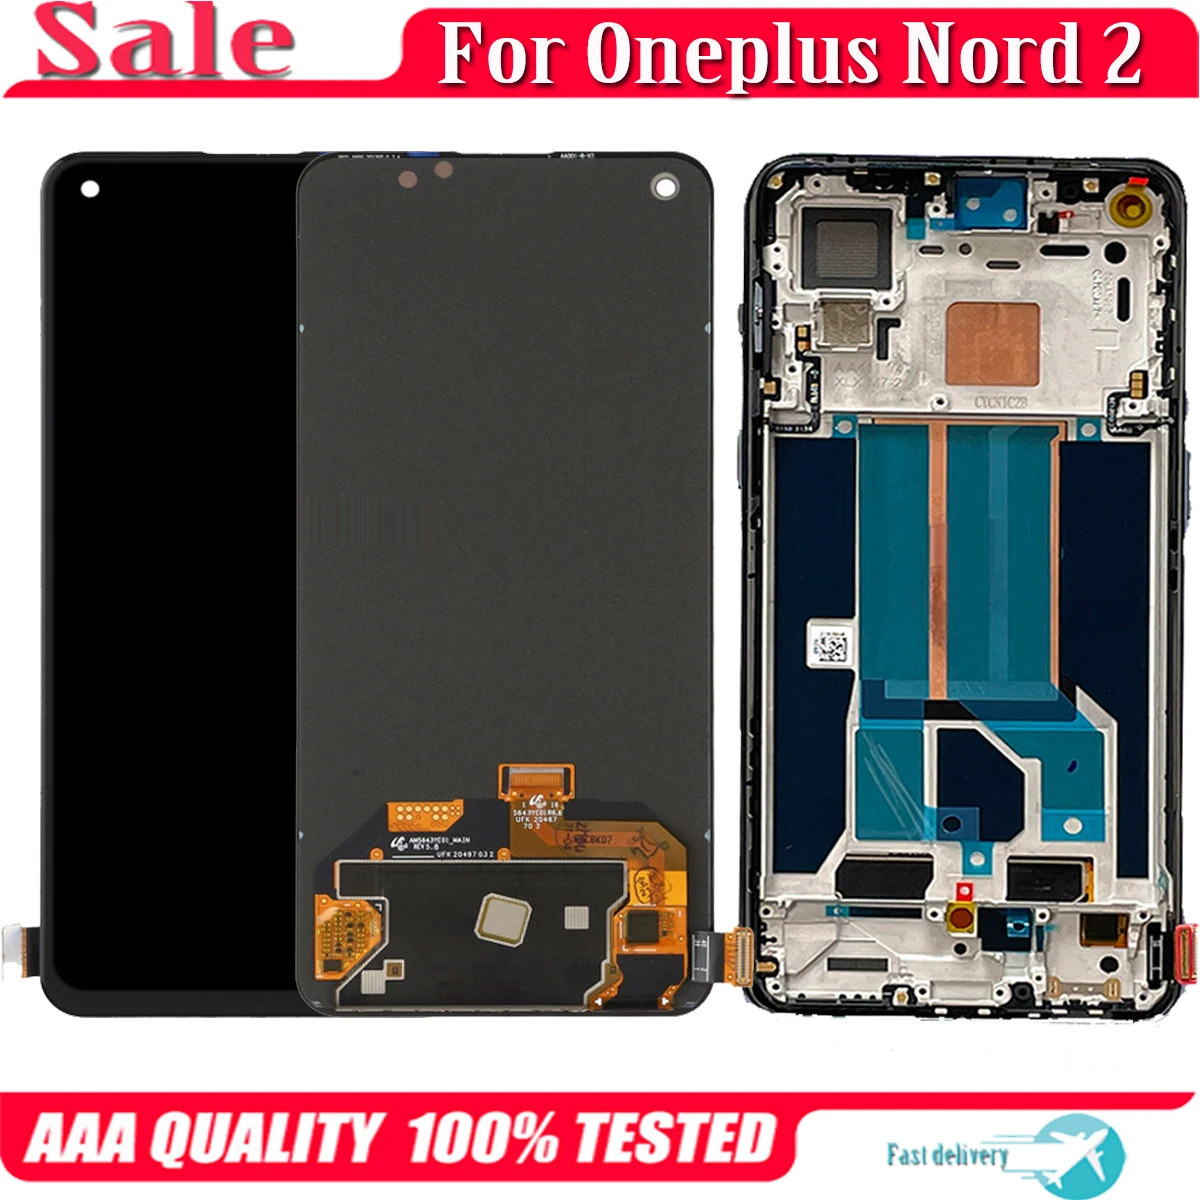 Oneplus Nord 2 display at Rs 7800/piece